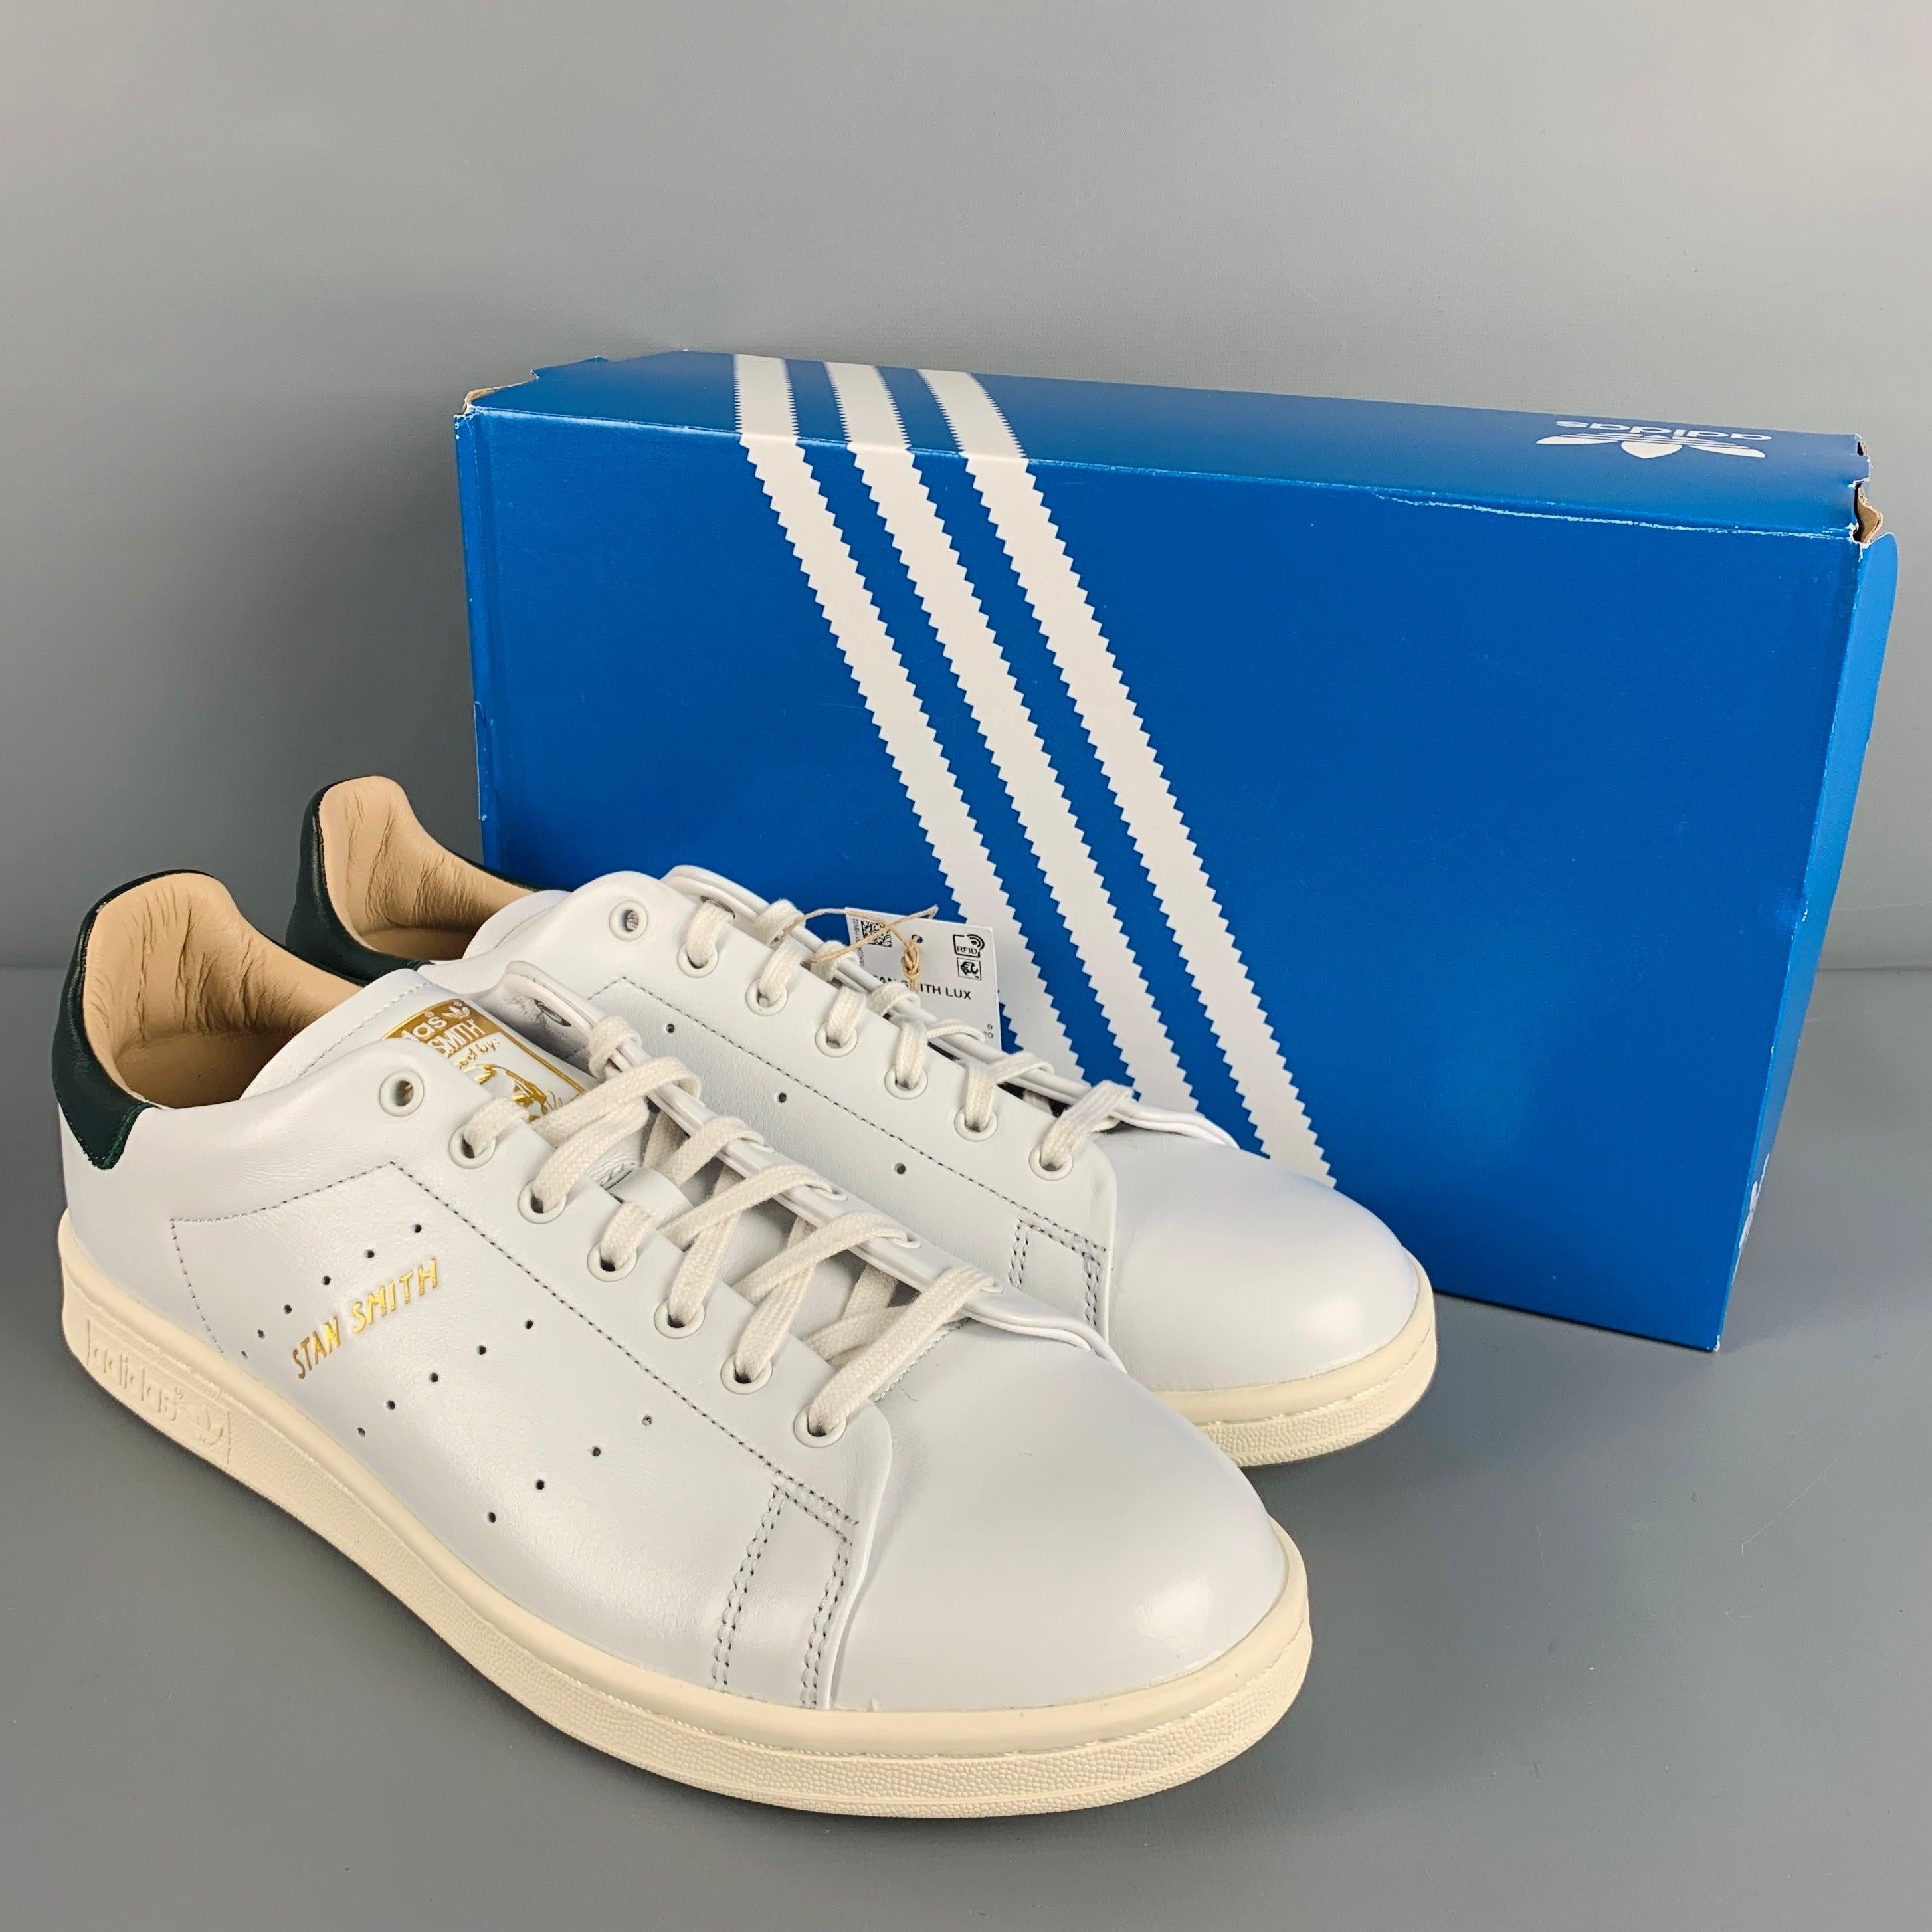 ADIDAS x STAN SMITH Size 9.5  White Perforated Leather Lace-Up Sneakers 5